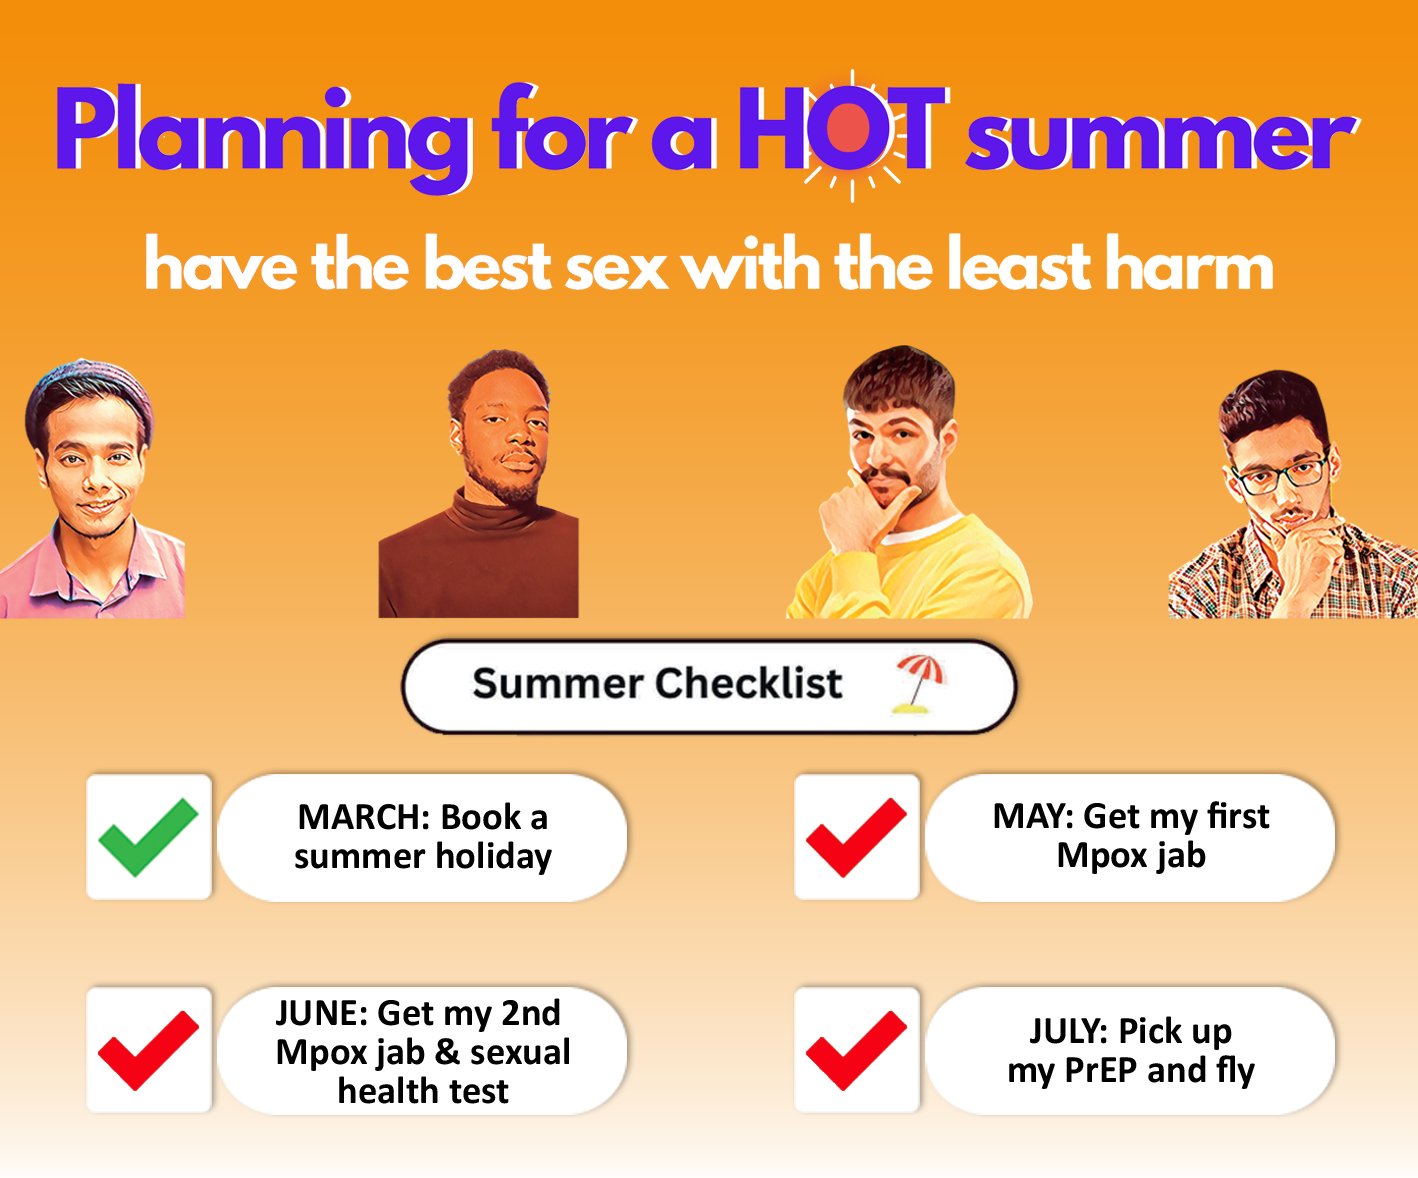 Planning for a hot summer? image